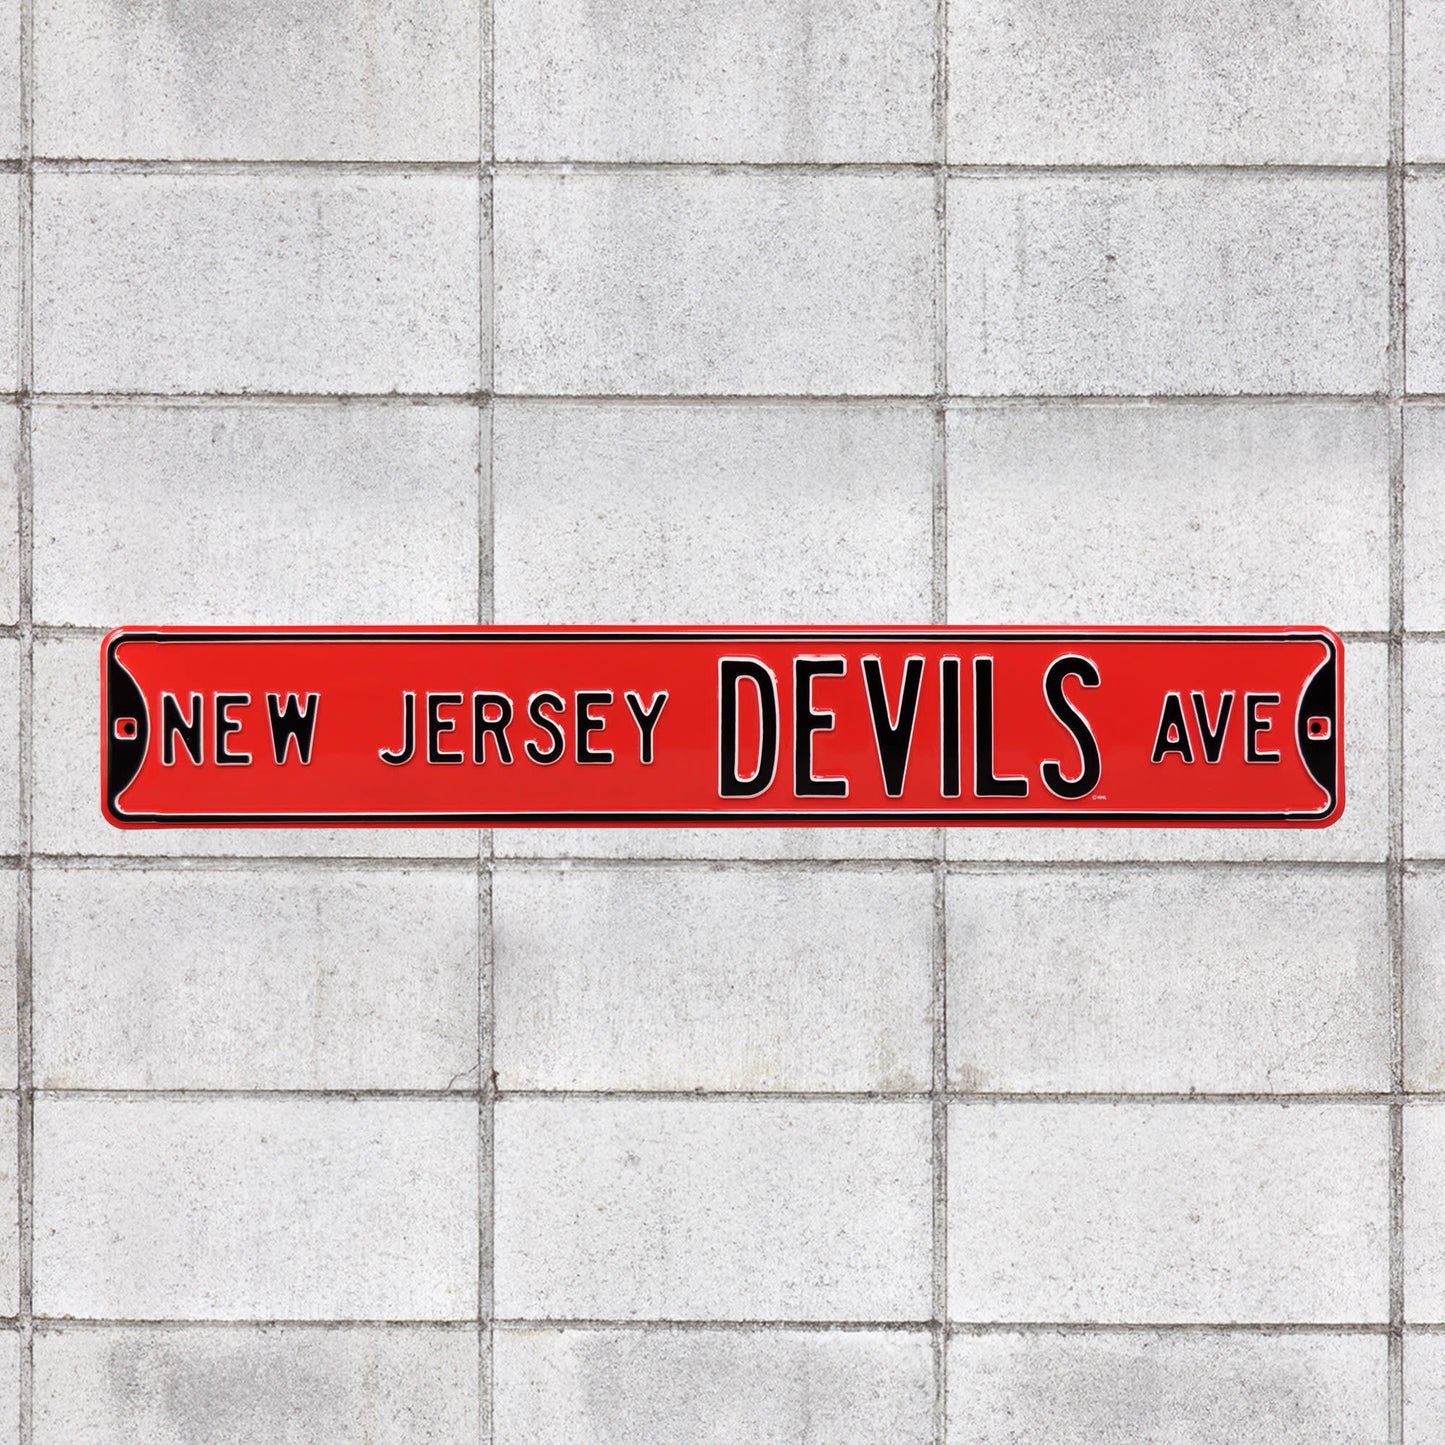 New Jersey Devils: New Jersey Devils Avenue - Officially Licensed NHL Metal Street Sign